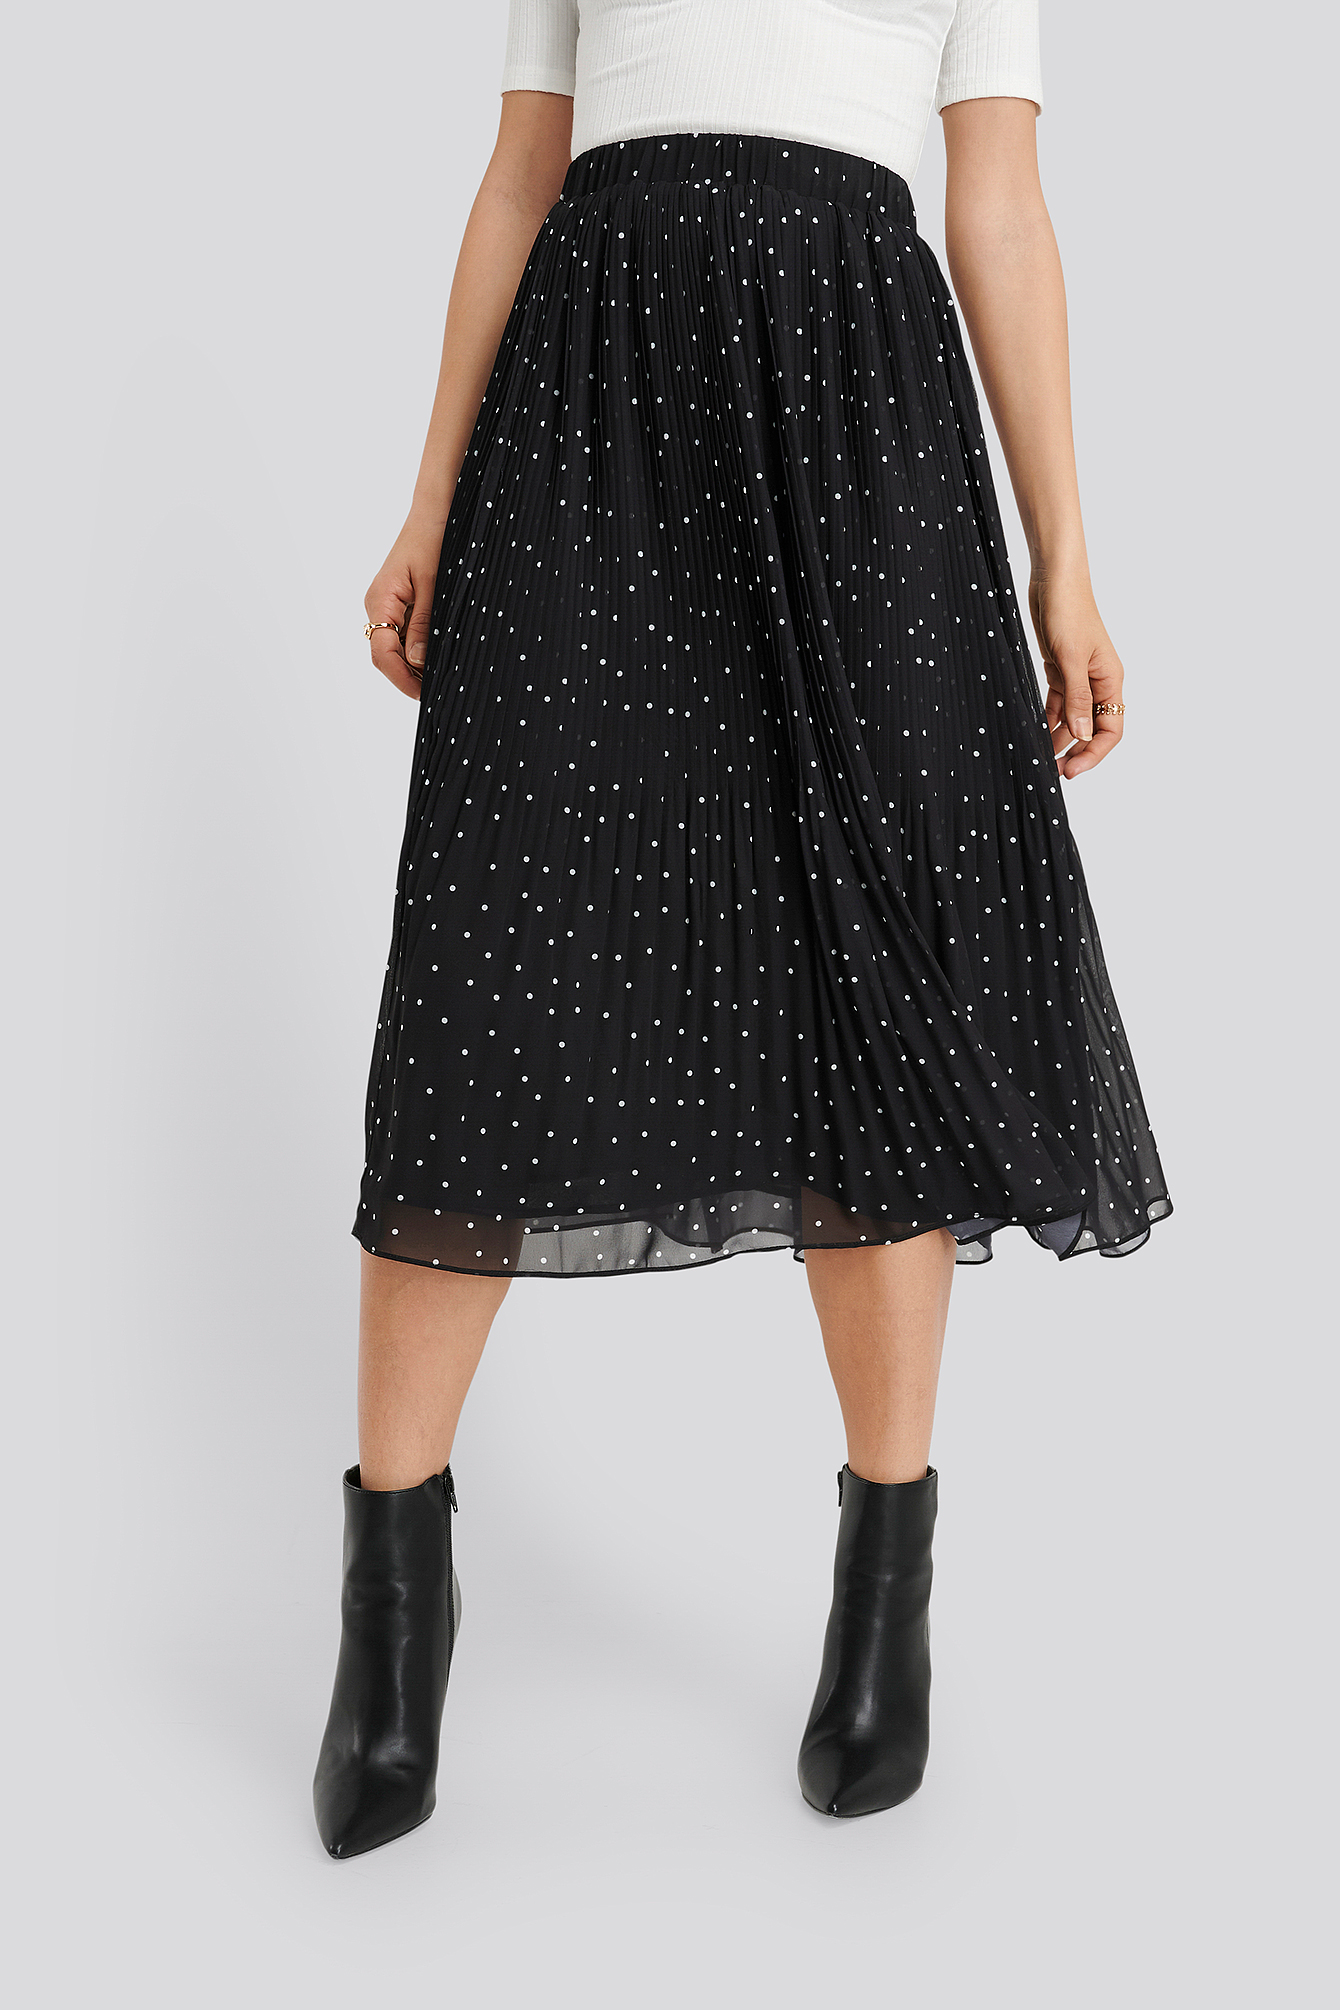 Black Pleated Dotted Skirt